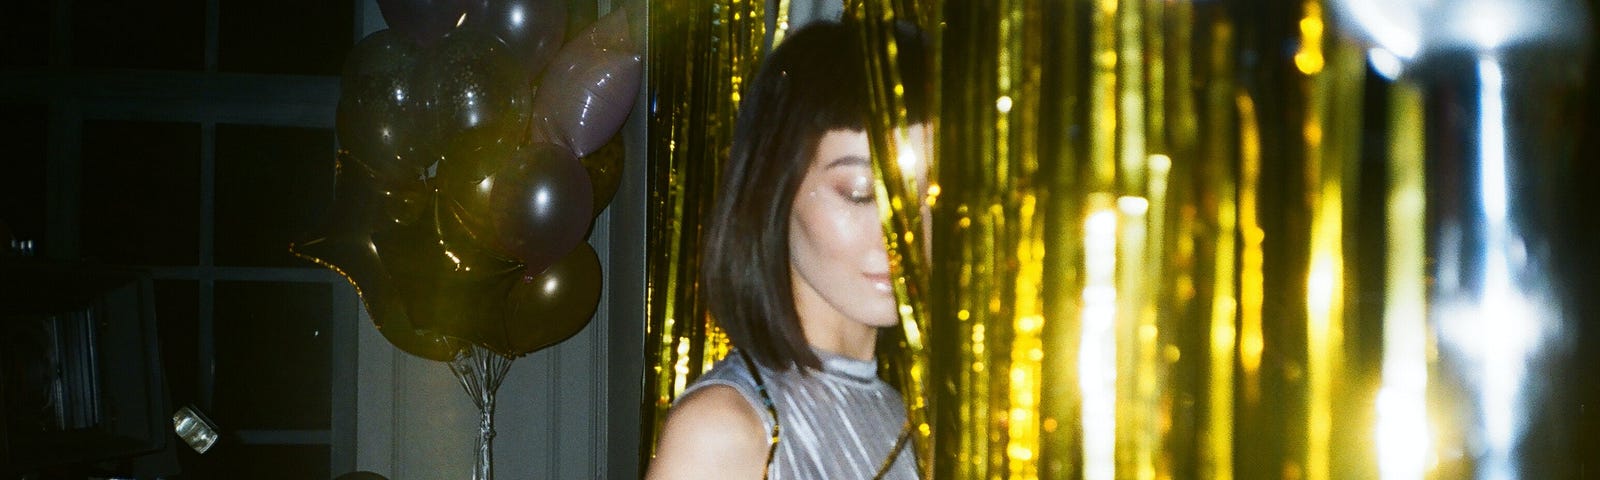 A young, thin, attractive woman who shoulder length black hair and a party dress is half hidden behind a gold foil curtain. Another woman and balloons, in less light, are in the background.